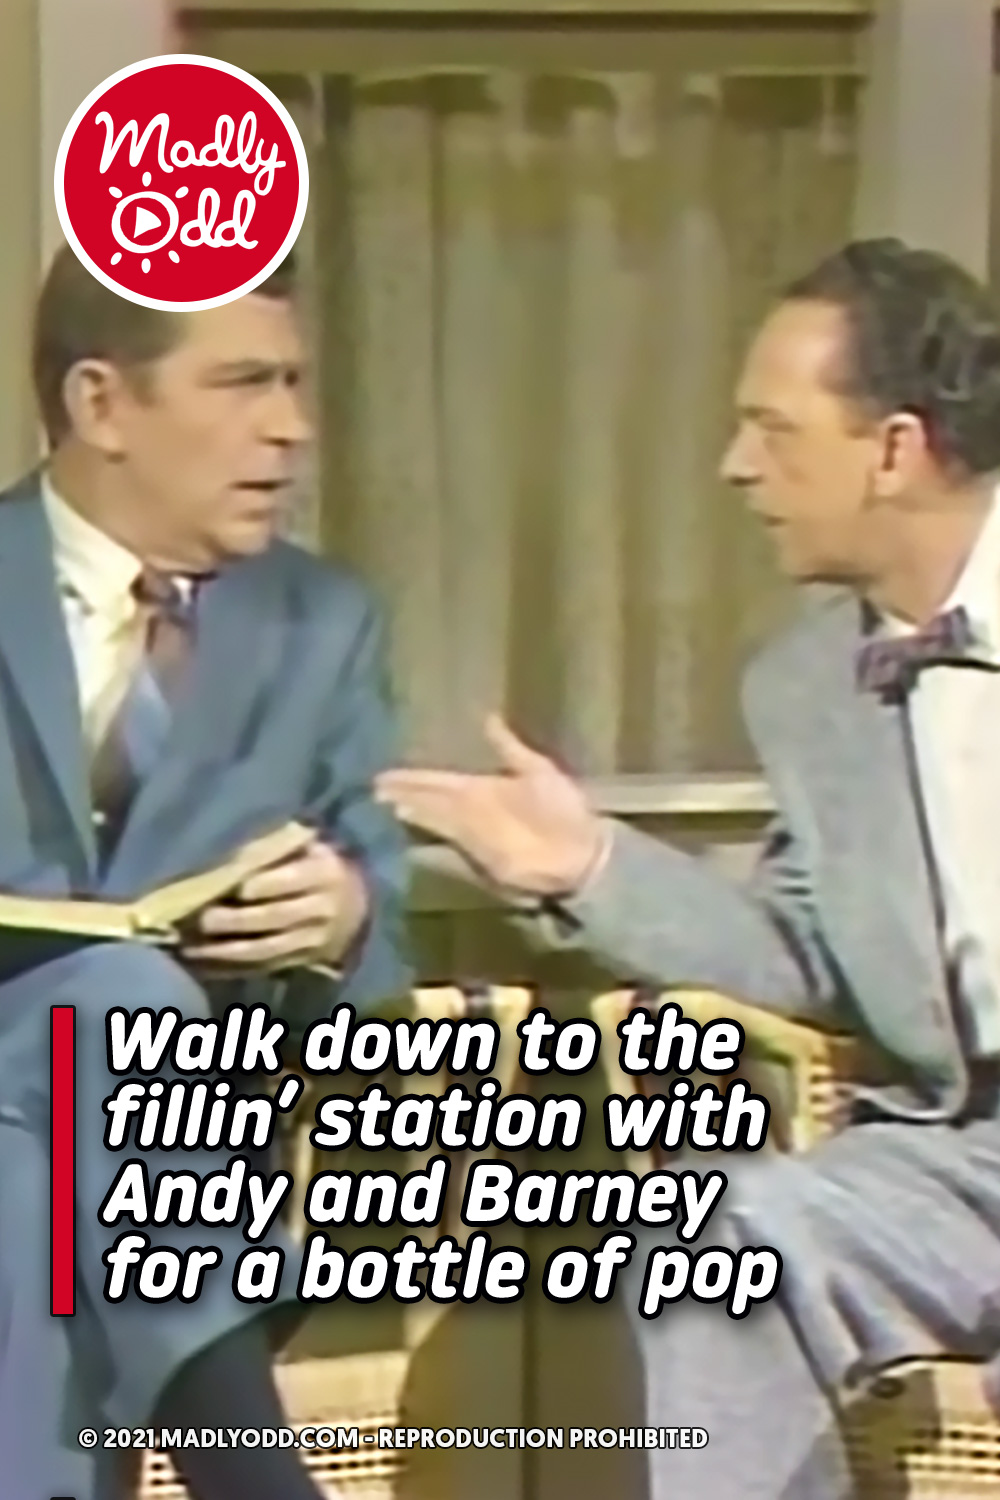 Walk down to the fillin’ station with Andy and Barney for a bottle of pop